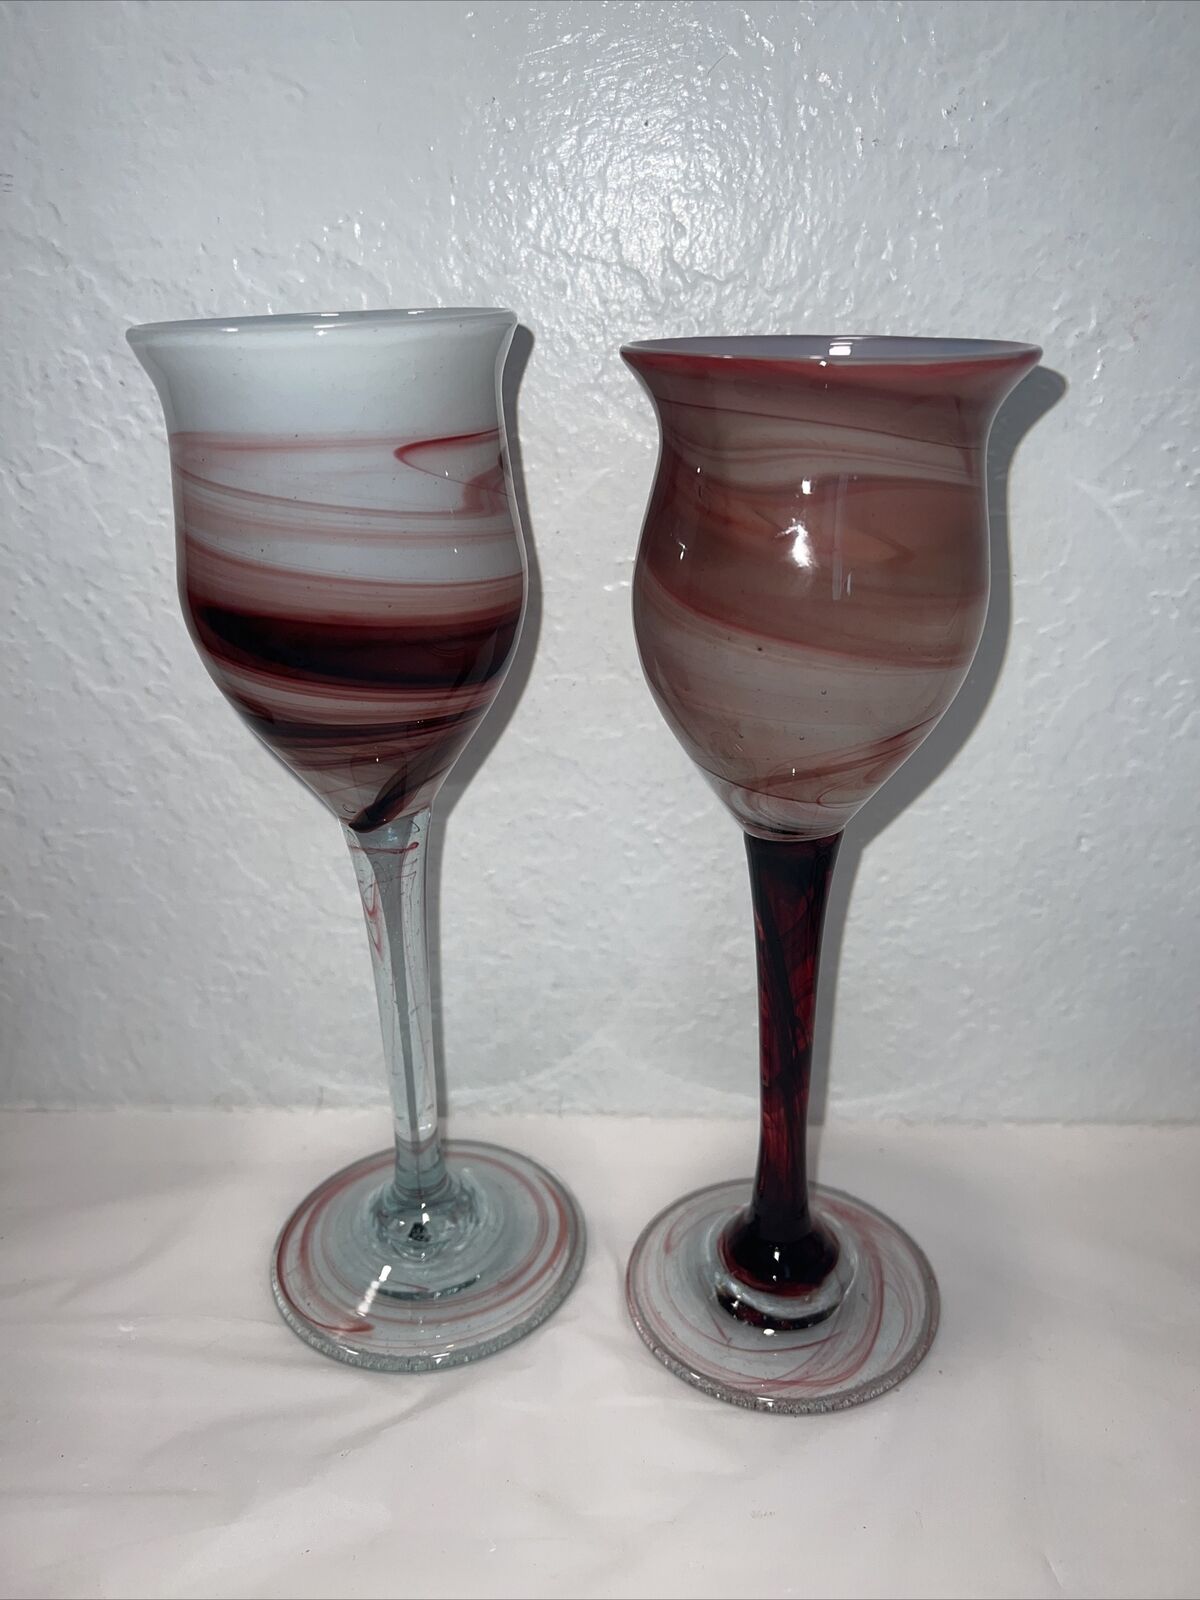 Steven Maslach Earth Art Glass Set of 2 Wine Glasses Signed and Dated 73’